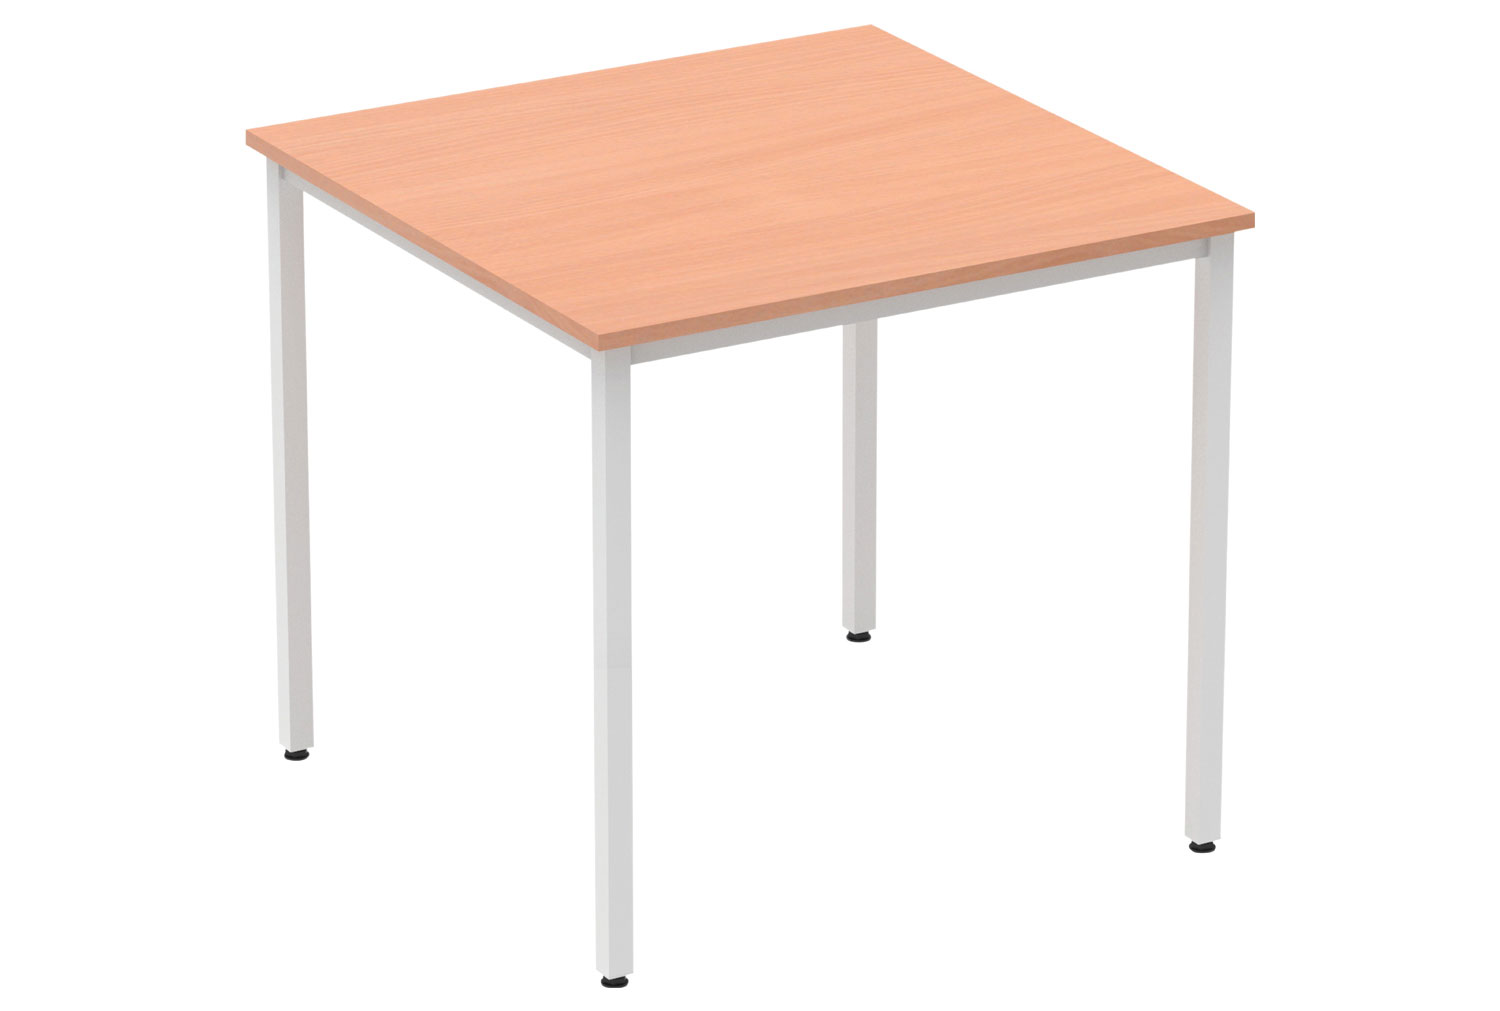 Vitali Square Meeting Table (Square Legs), Beech, Fully Installed